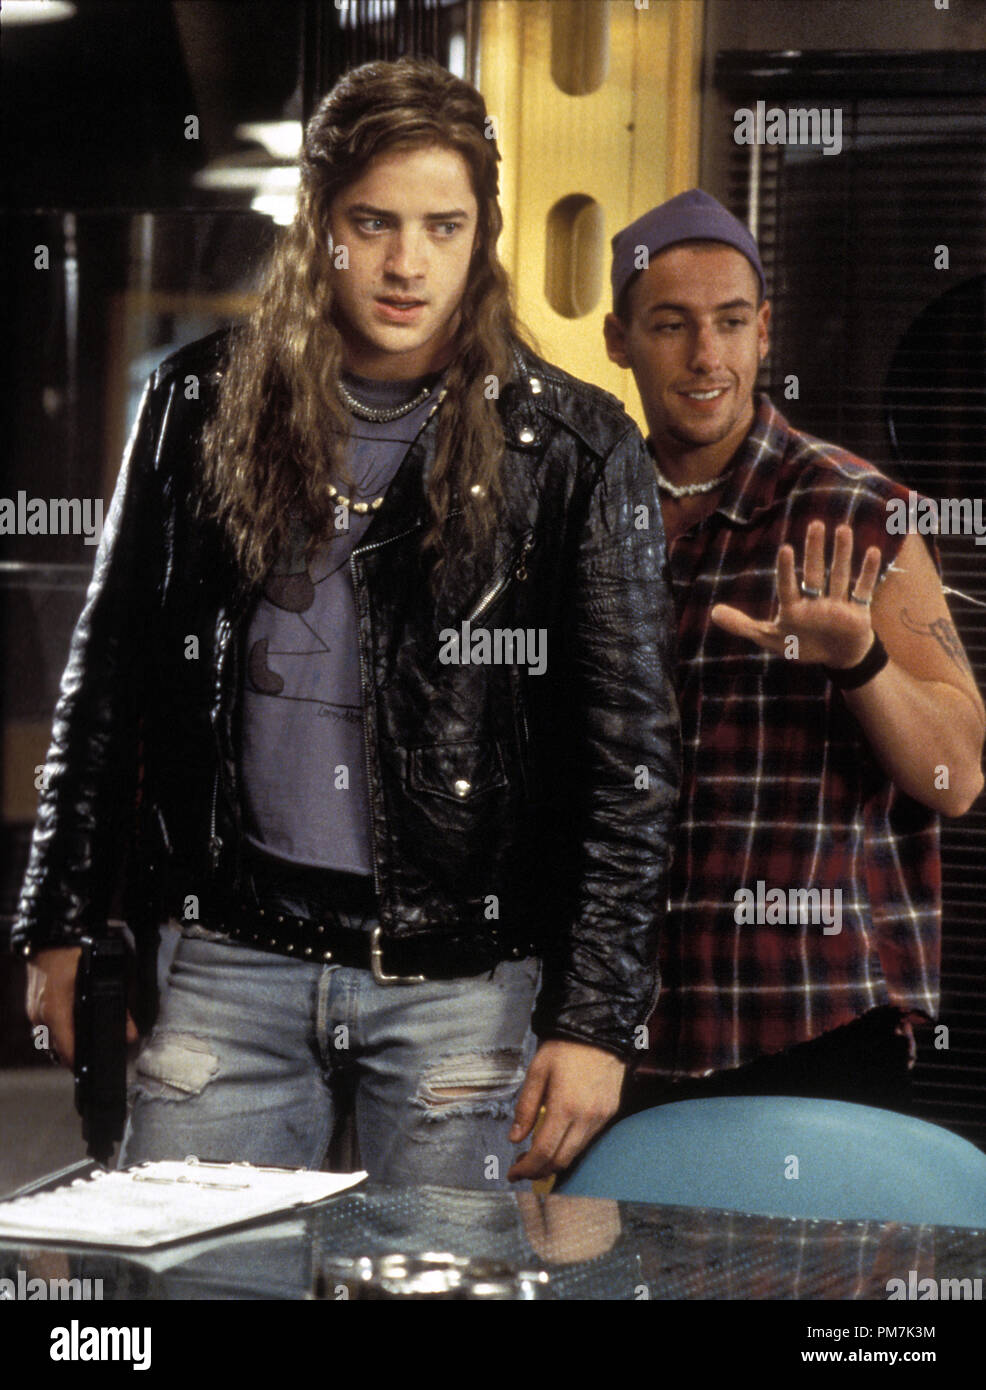 Film Still from "Airheads" Brendan Fraser, Adam Sandler © 1994 20th Century Fox Photo Credit: Merie W. Wallace    File Reference # 31129456THA  For Editorial Use Only - All Rights Reserved Stock Photo